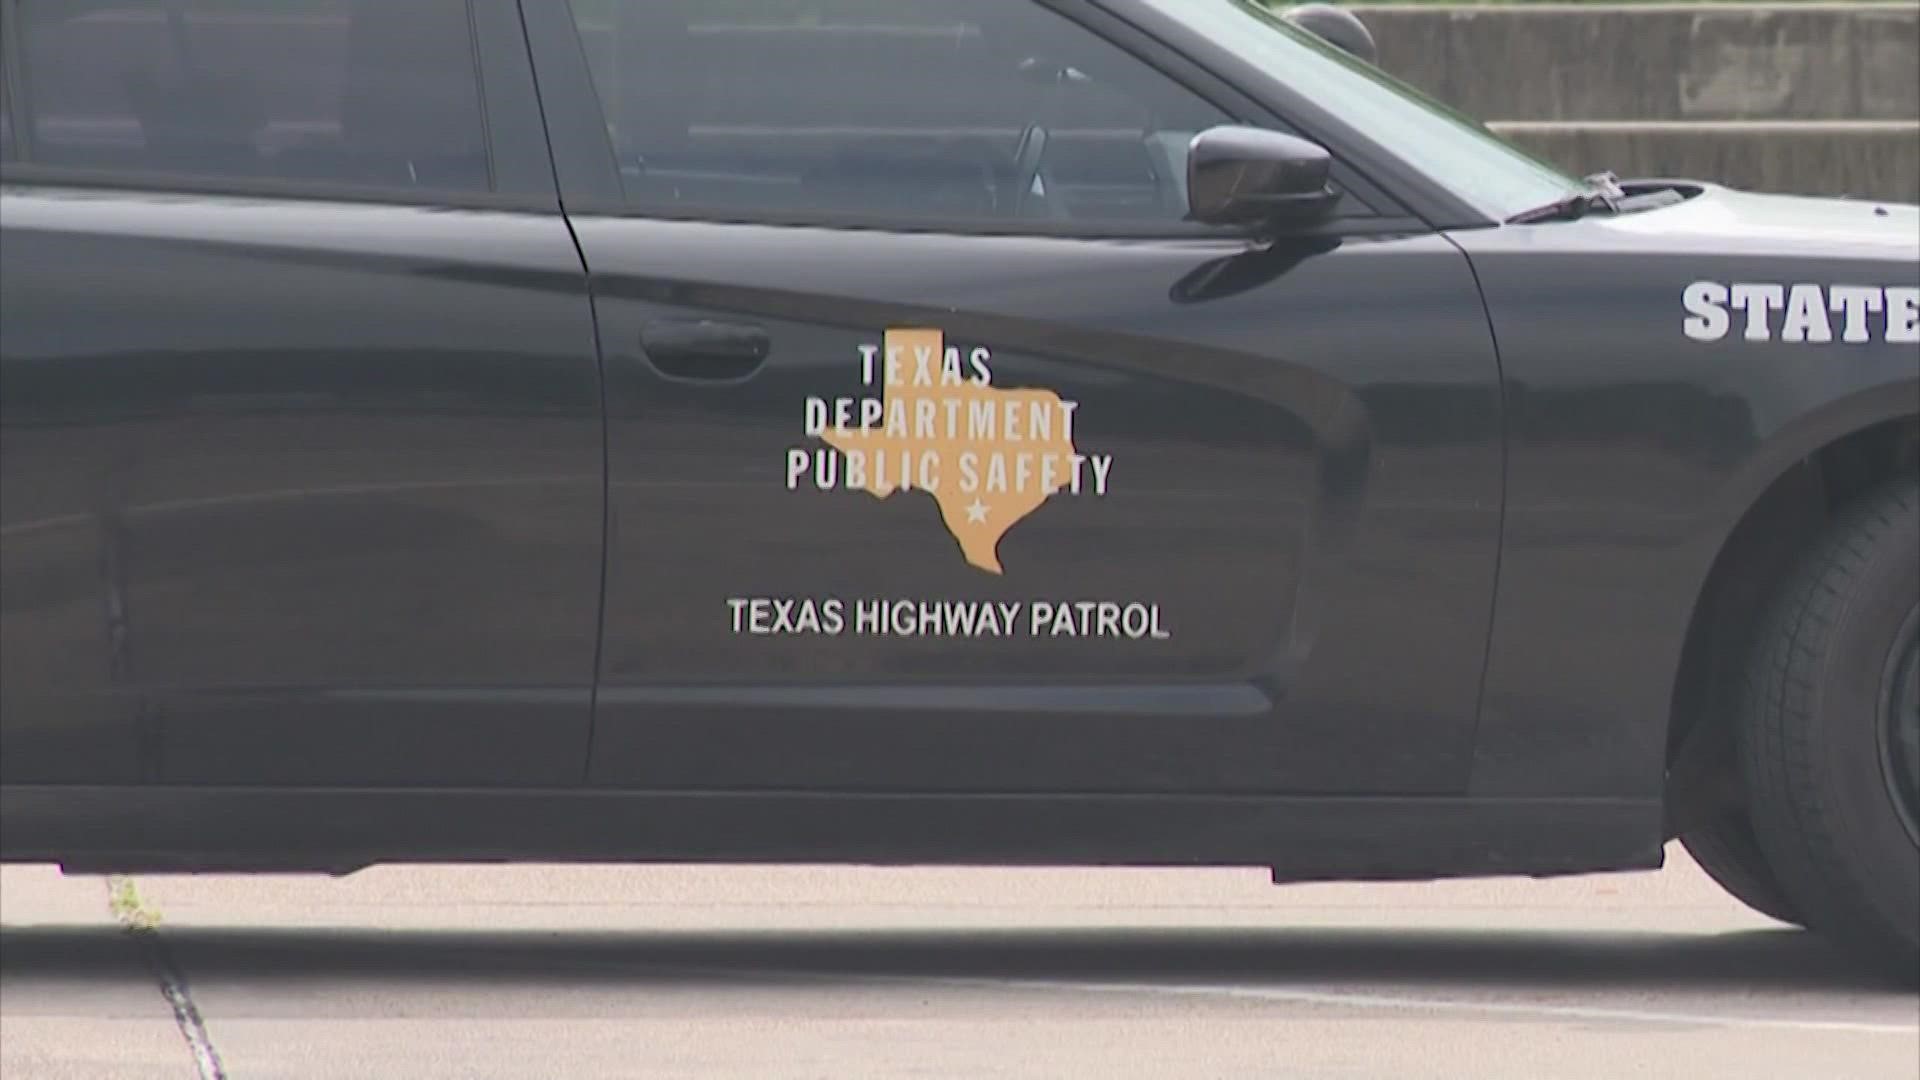 More than 200 state troopers are being forced to slim down under the new Texas DPS policy.